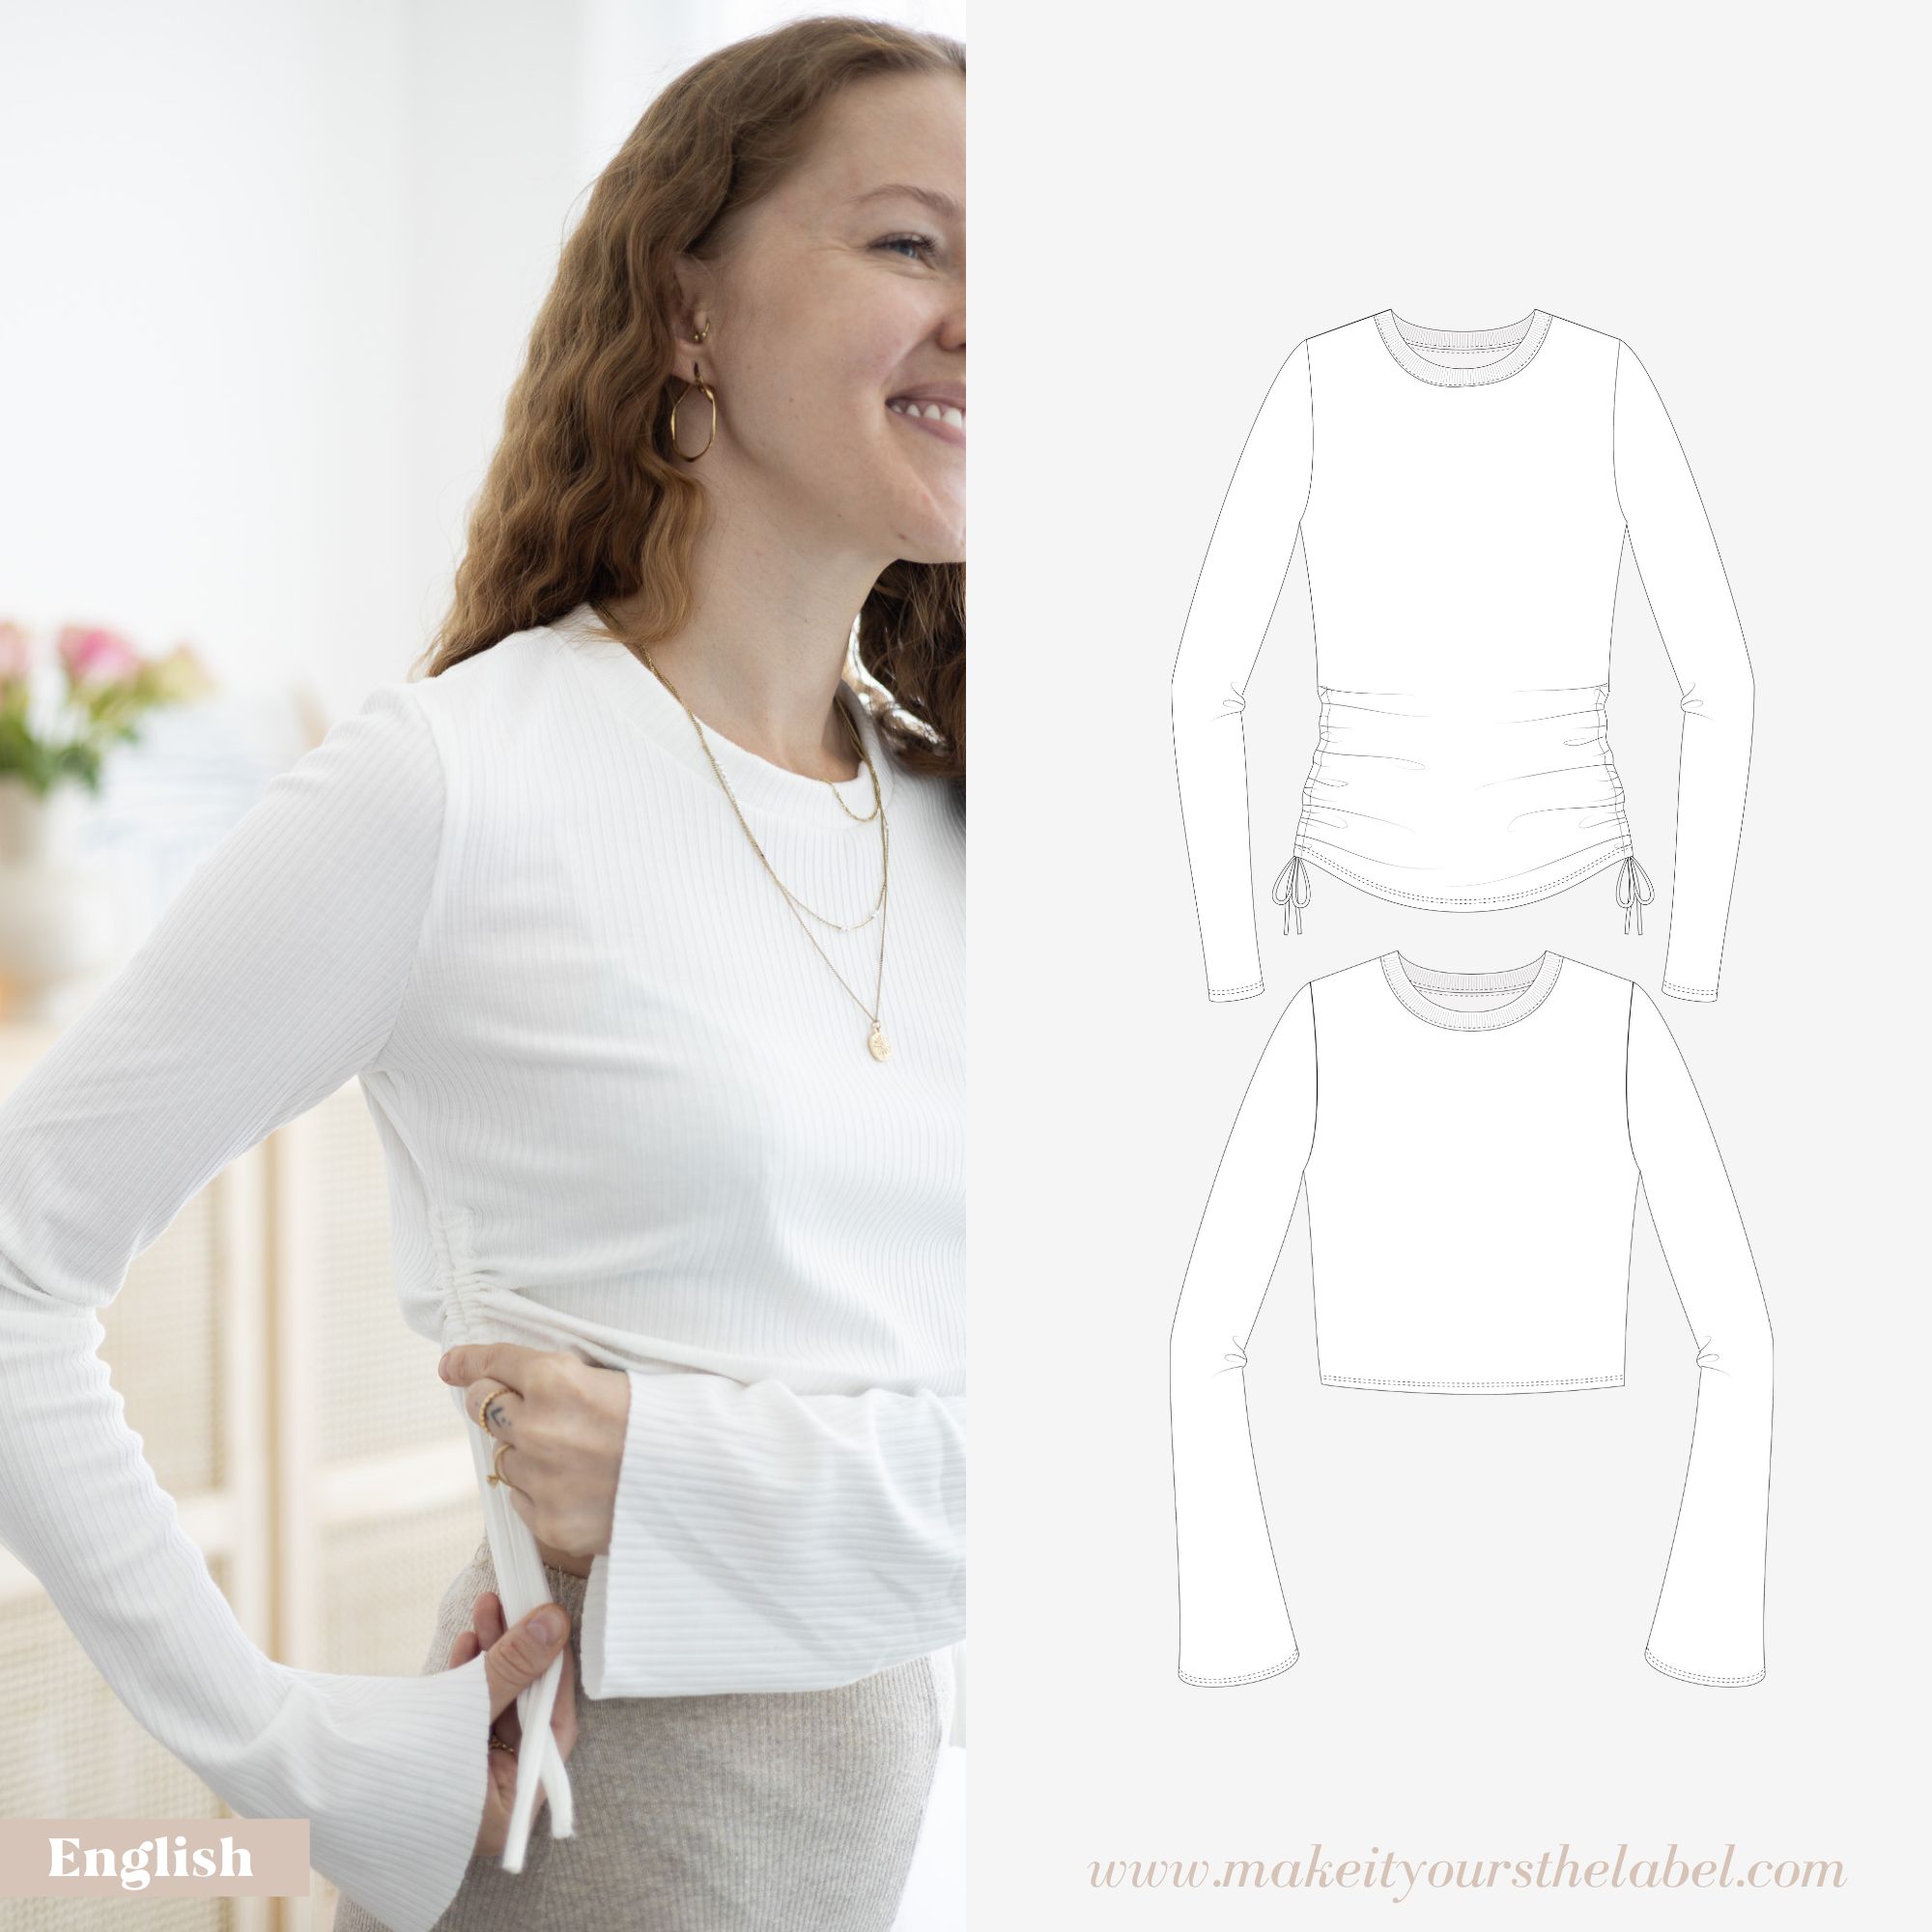 https://makeityoursthelabel.com/wp-content/uploads/2022/12/Long-Sleeve-Crop-Top-with-ruched-sides-PDF-Sewing-Pattern-for-a-basic-Top.jpg